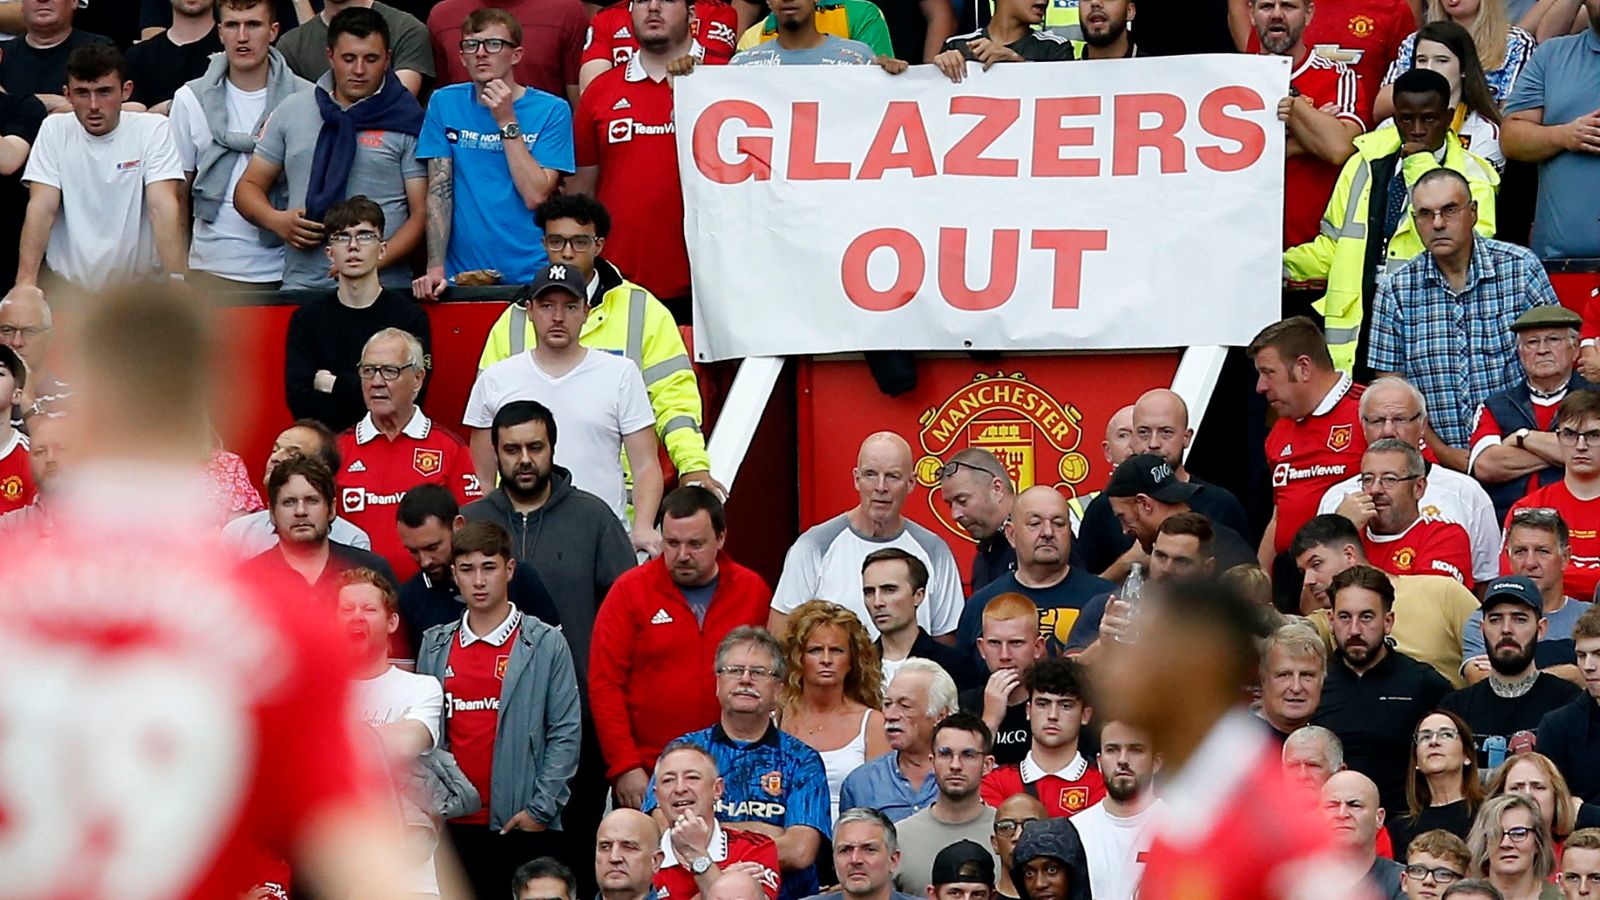 Glazers 'taken the money out' of Manchester United, says club's former director